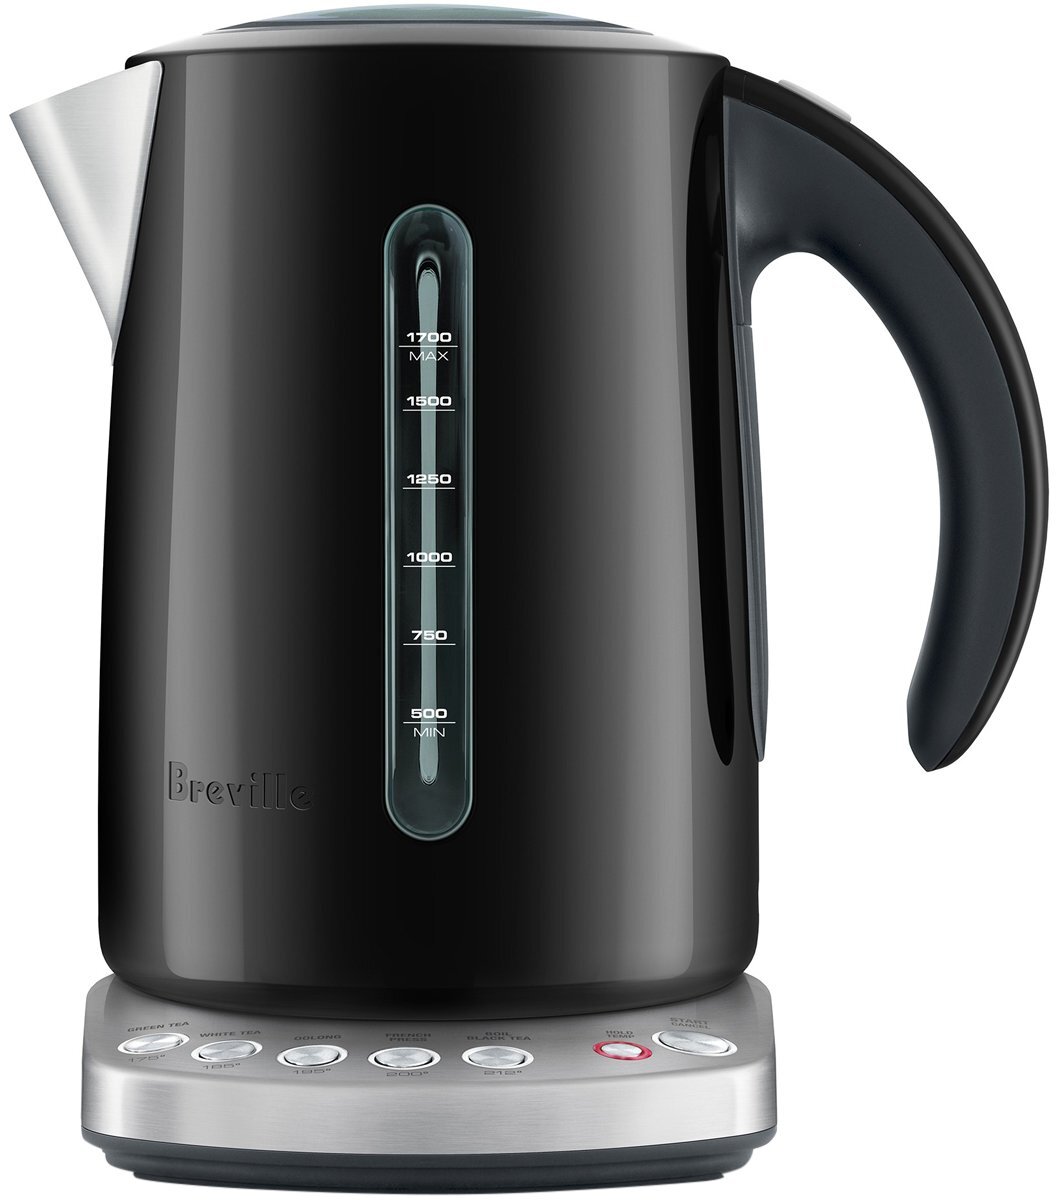 Breville Variable Temperature Electric Kettle - BKE820XL